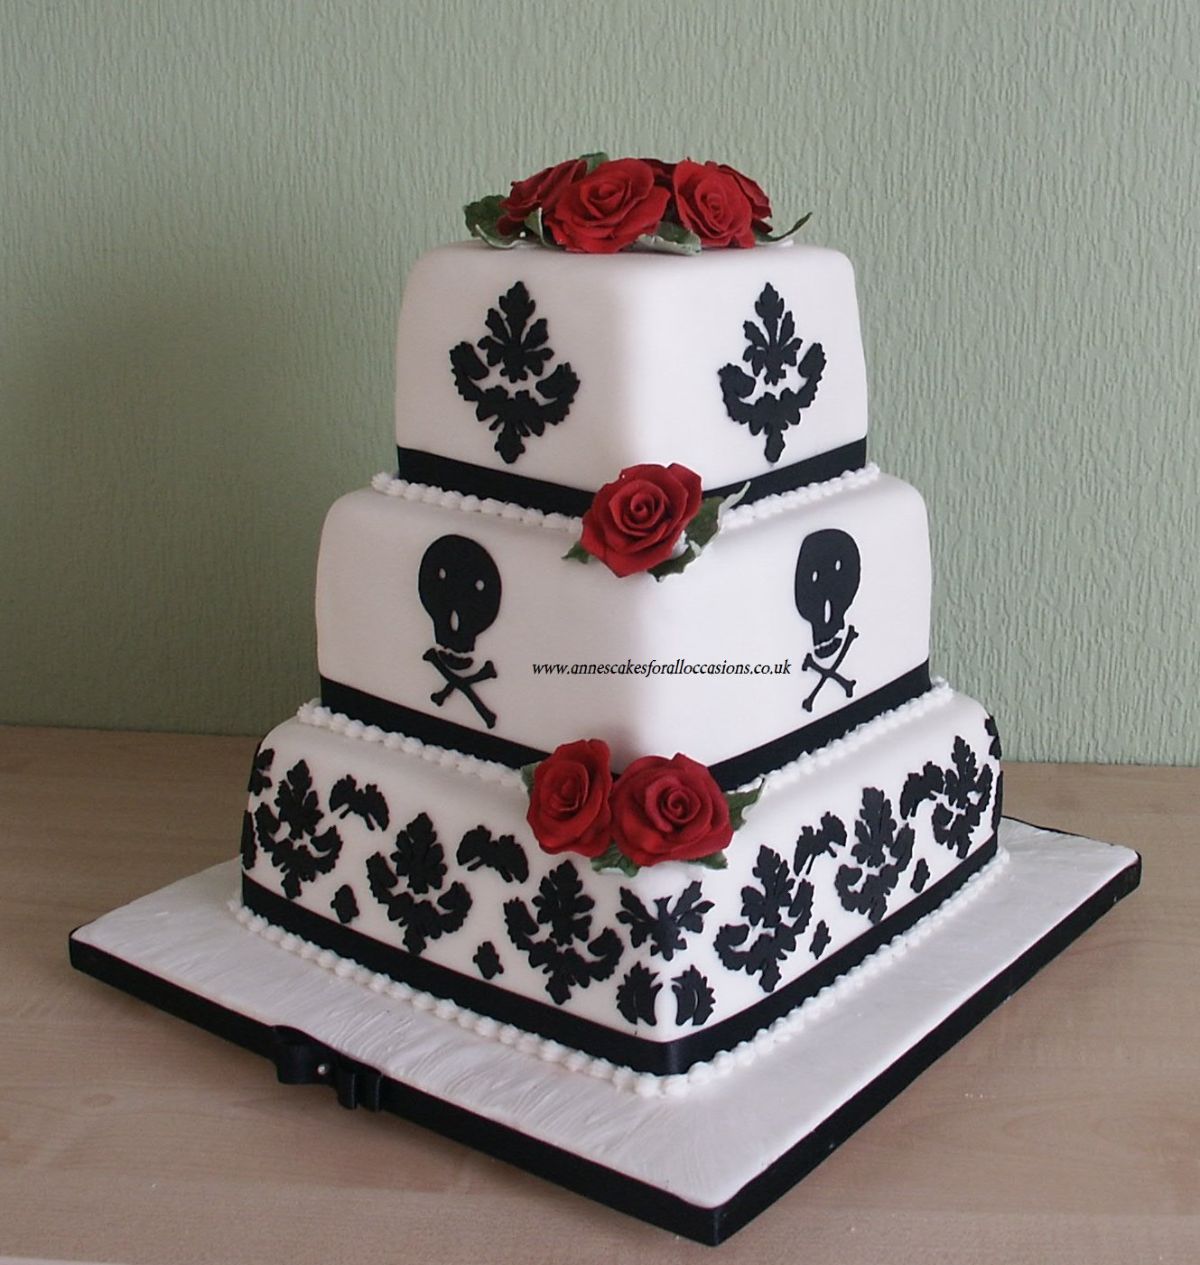 Annes Cakes For All Occasions-Image-170